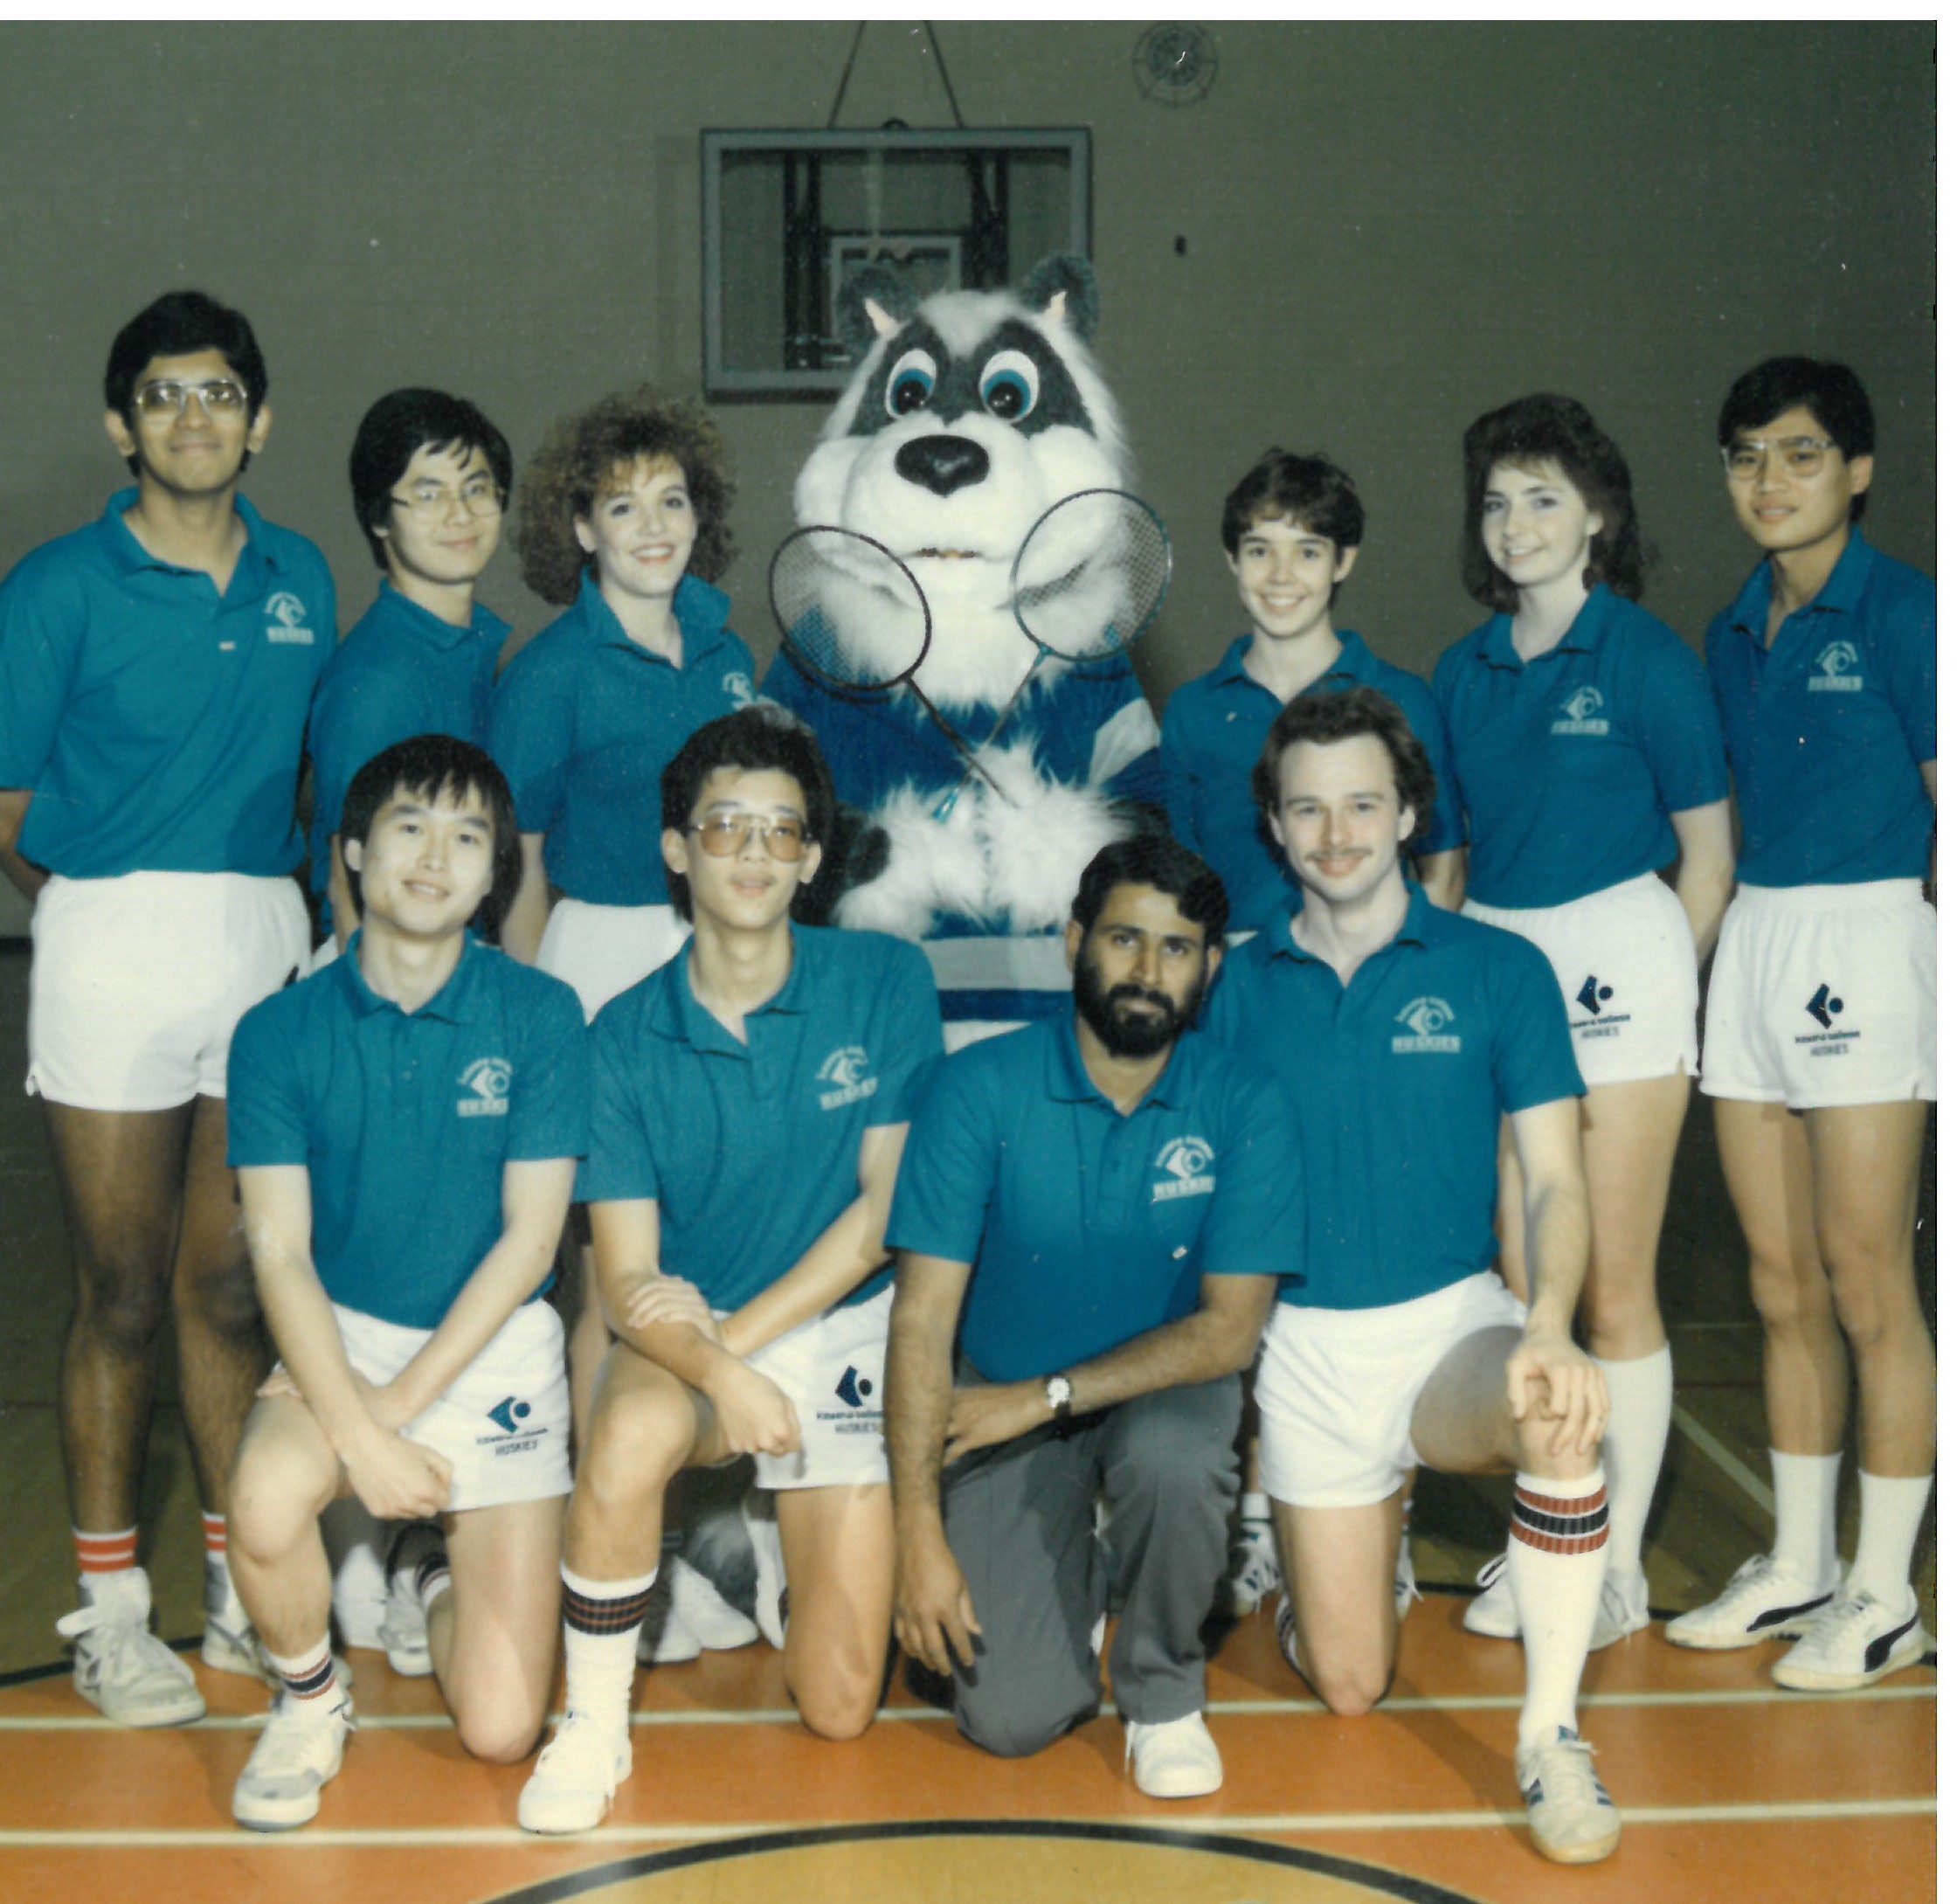 student badminton athletes posing in a gym with huskies mascot